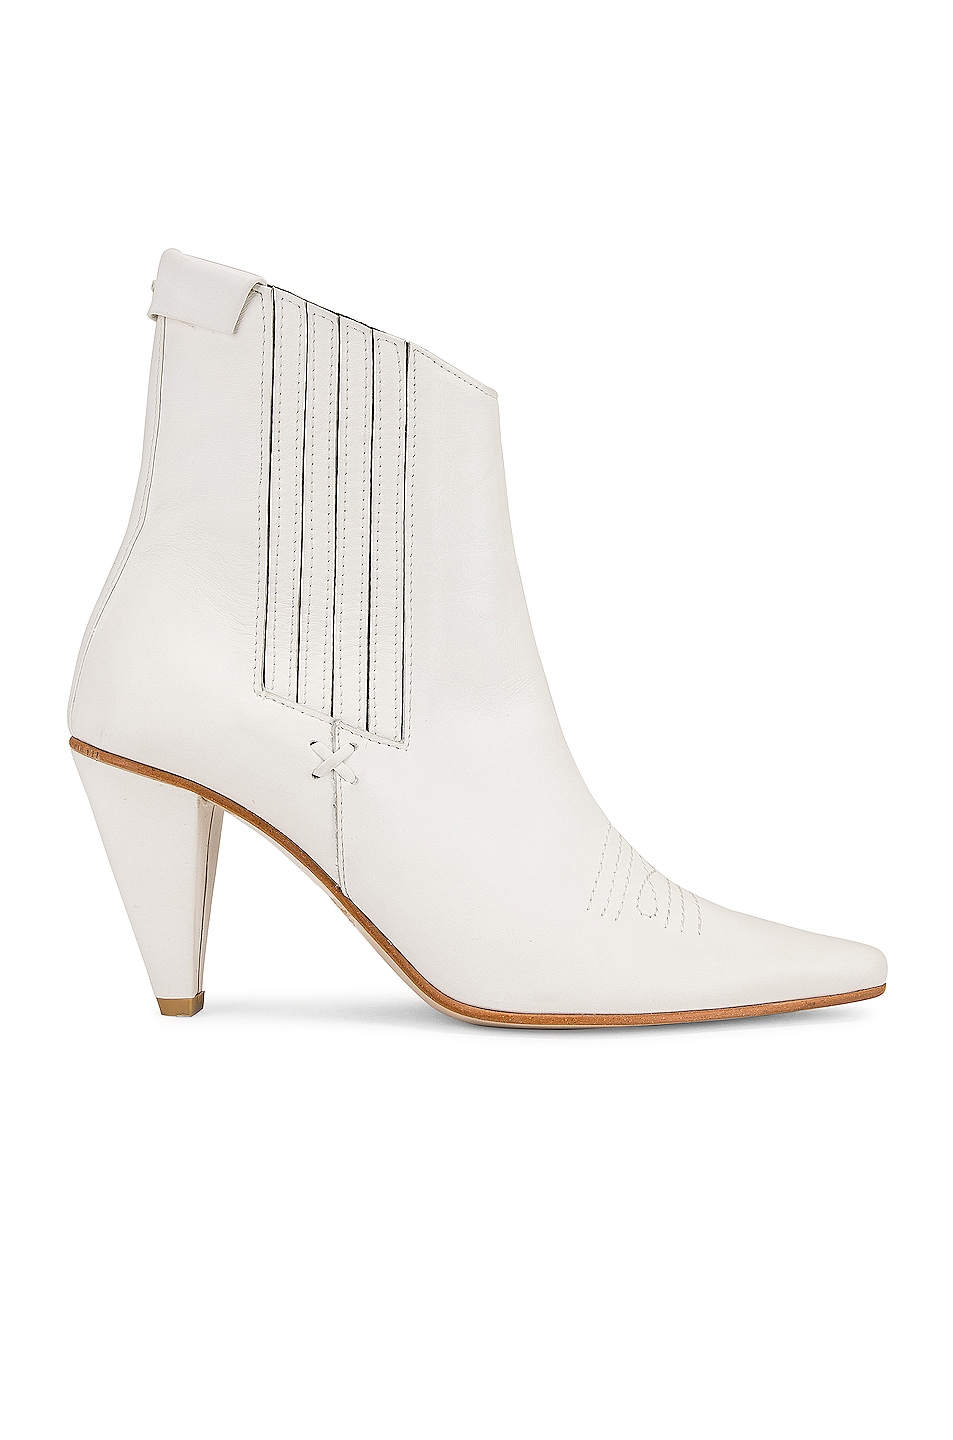 Image 1 of Reike Nen Pointed Chelsea Slim Boots in White